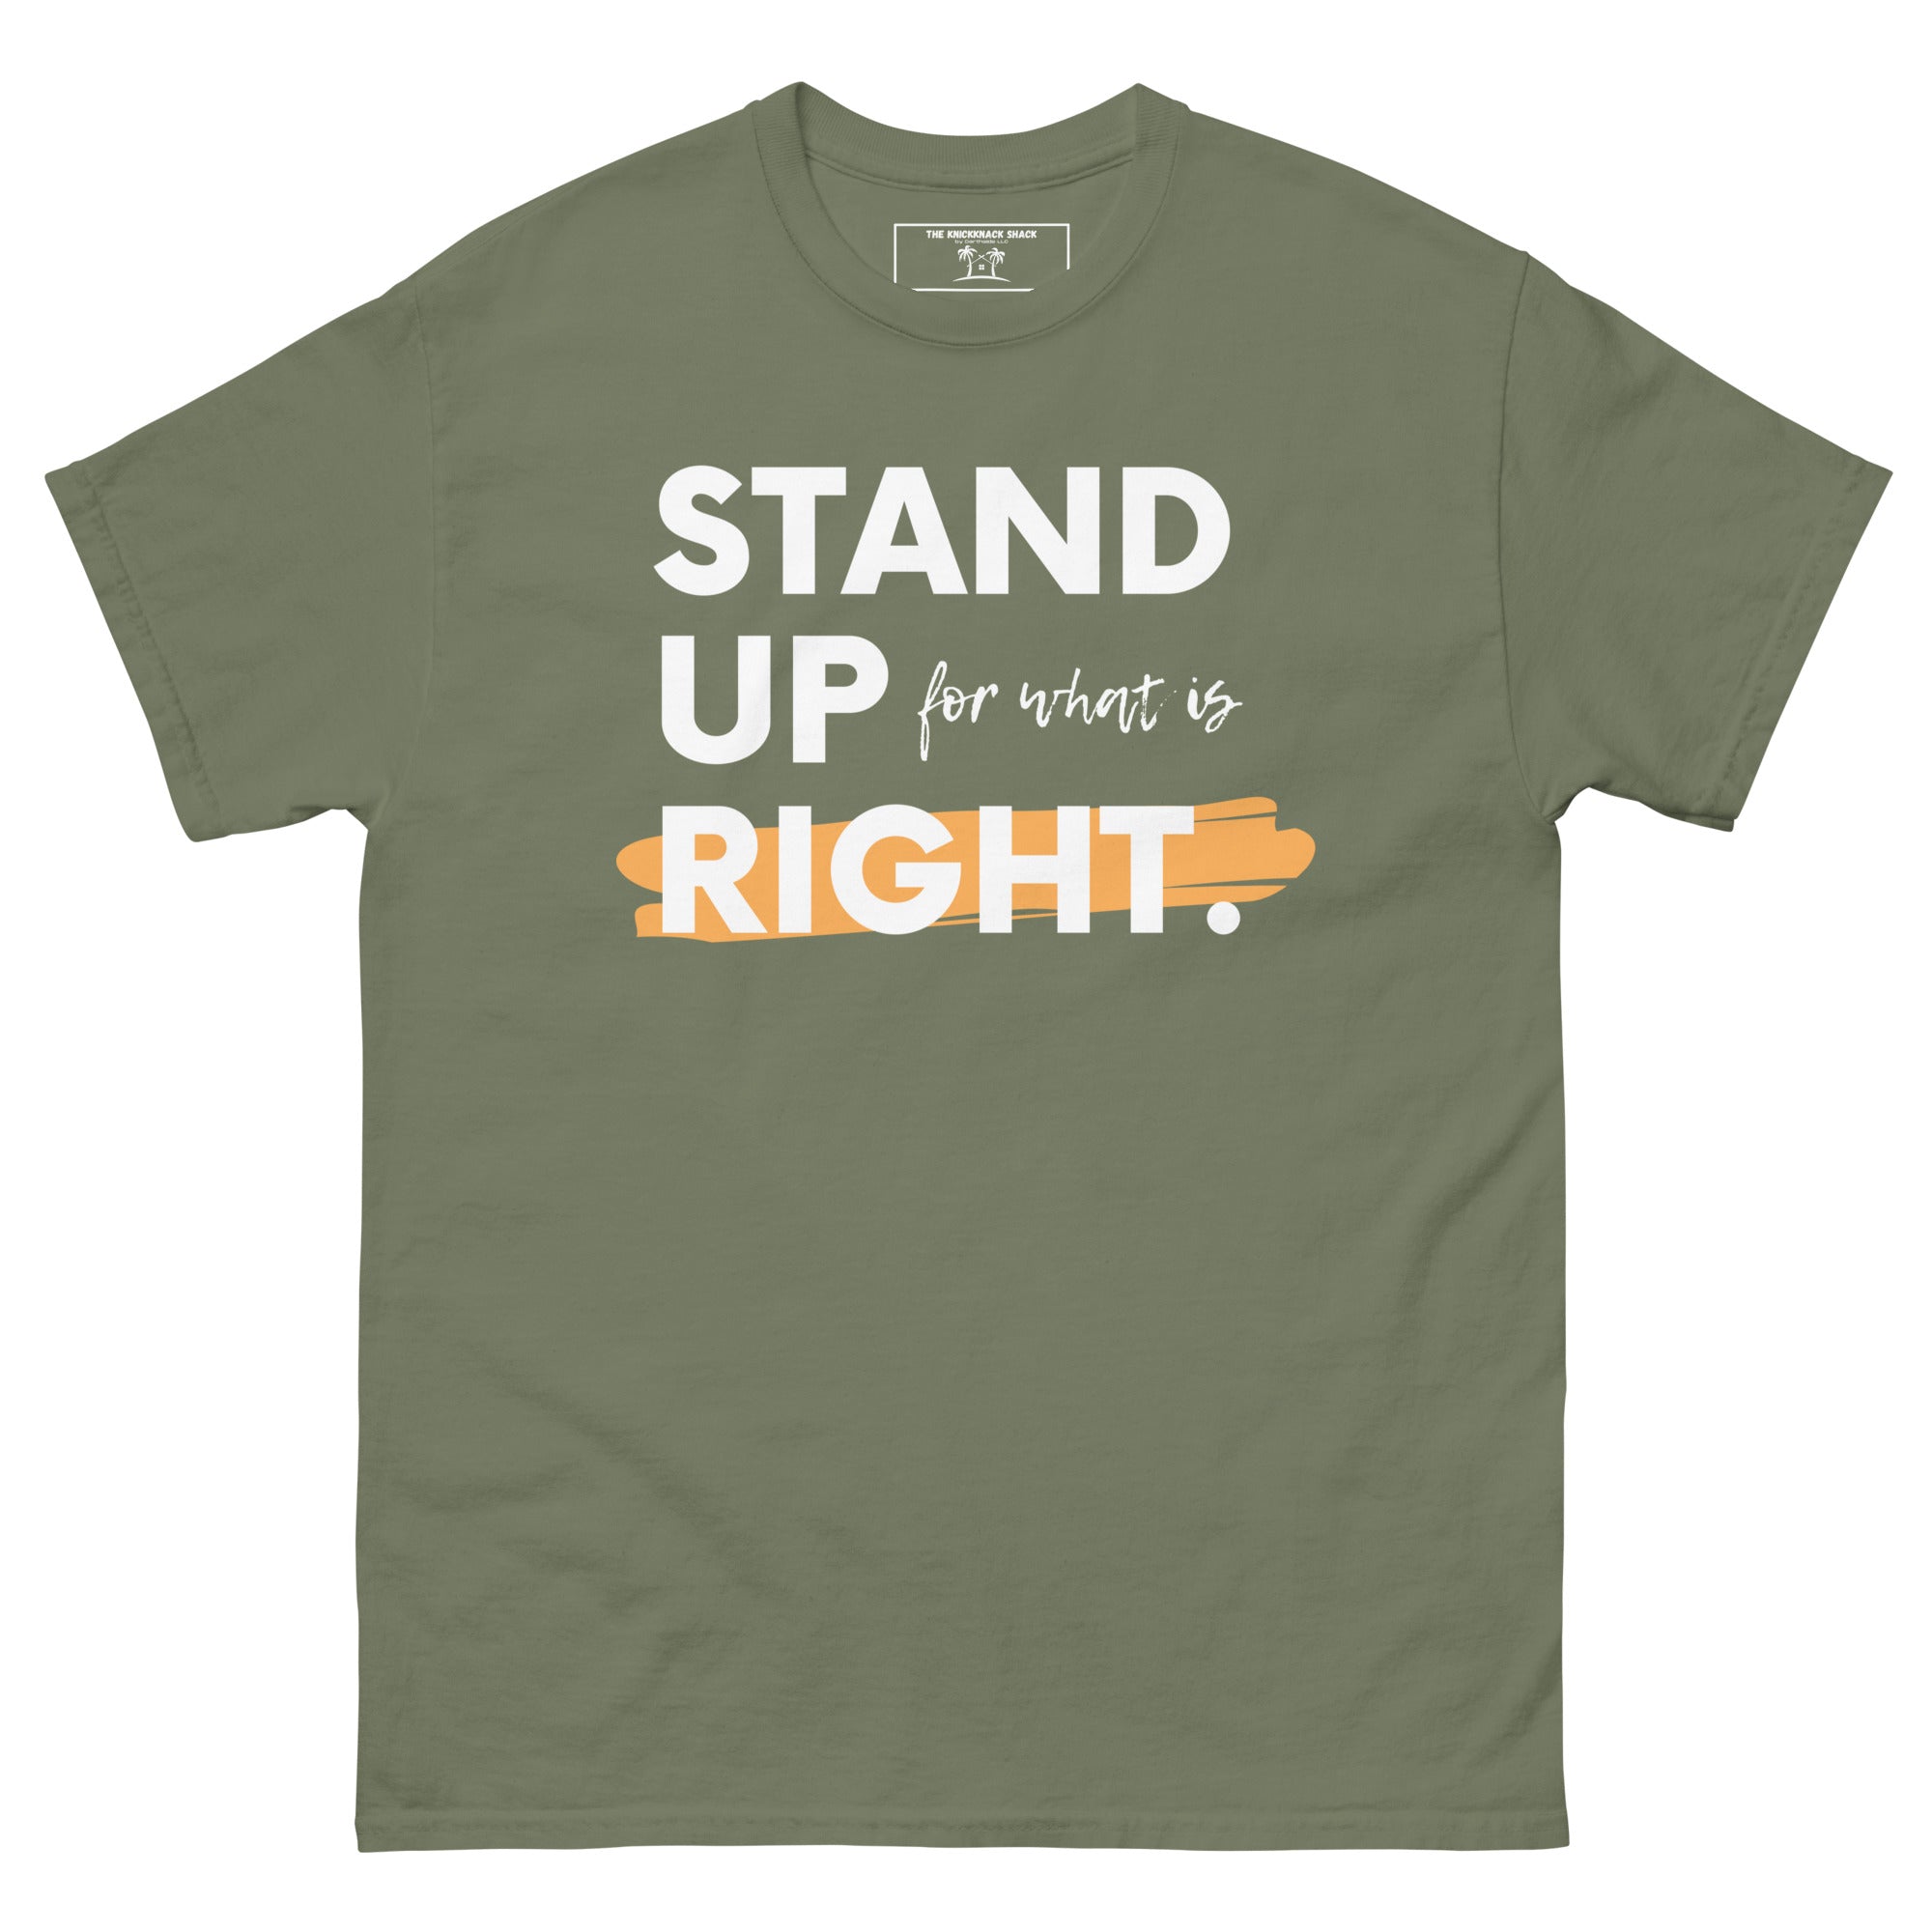 Classic Tee - Stand Up (Dark Colors)